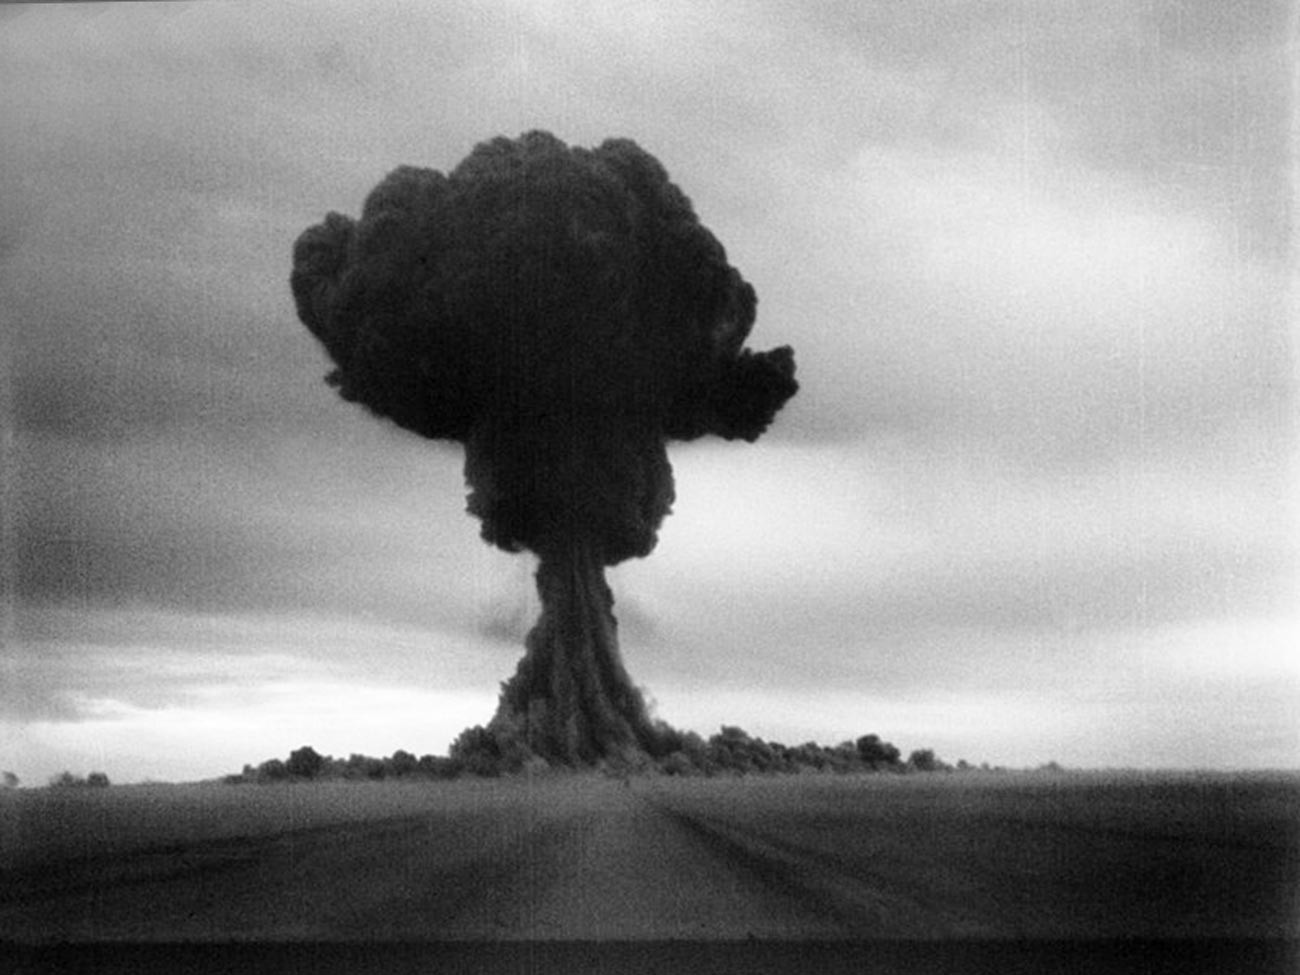 The Soviet Union detonated its first atomic bomb on Aug. 29, 1949, at Semipalatinsk Test Site, in Kazakhstan.